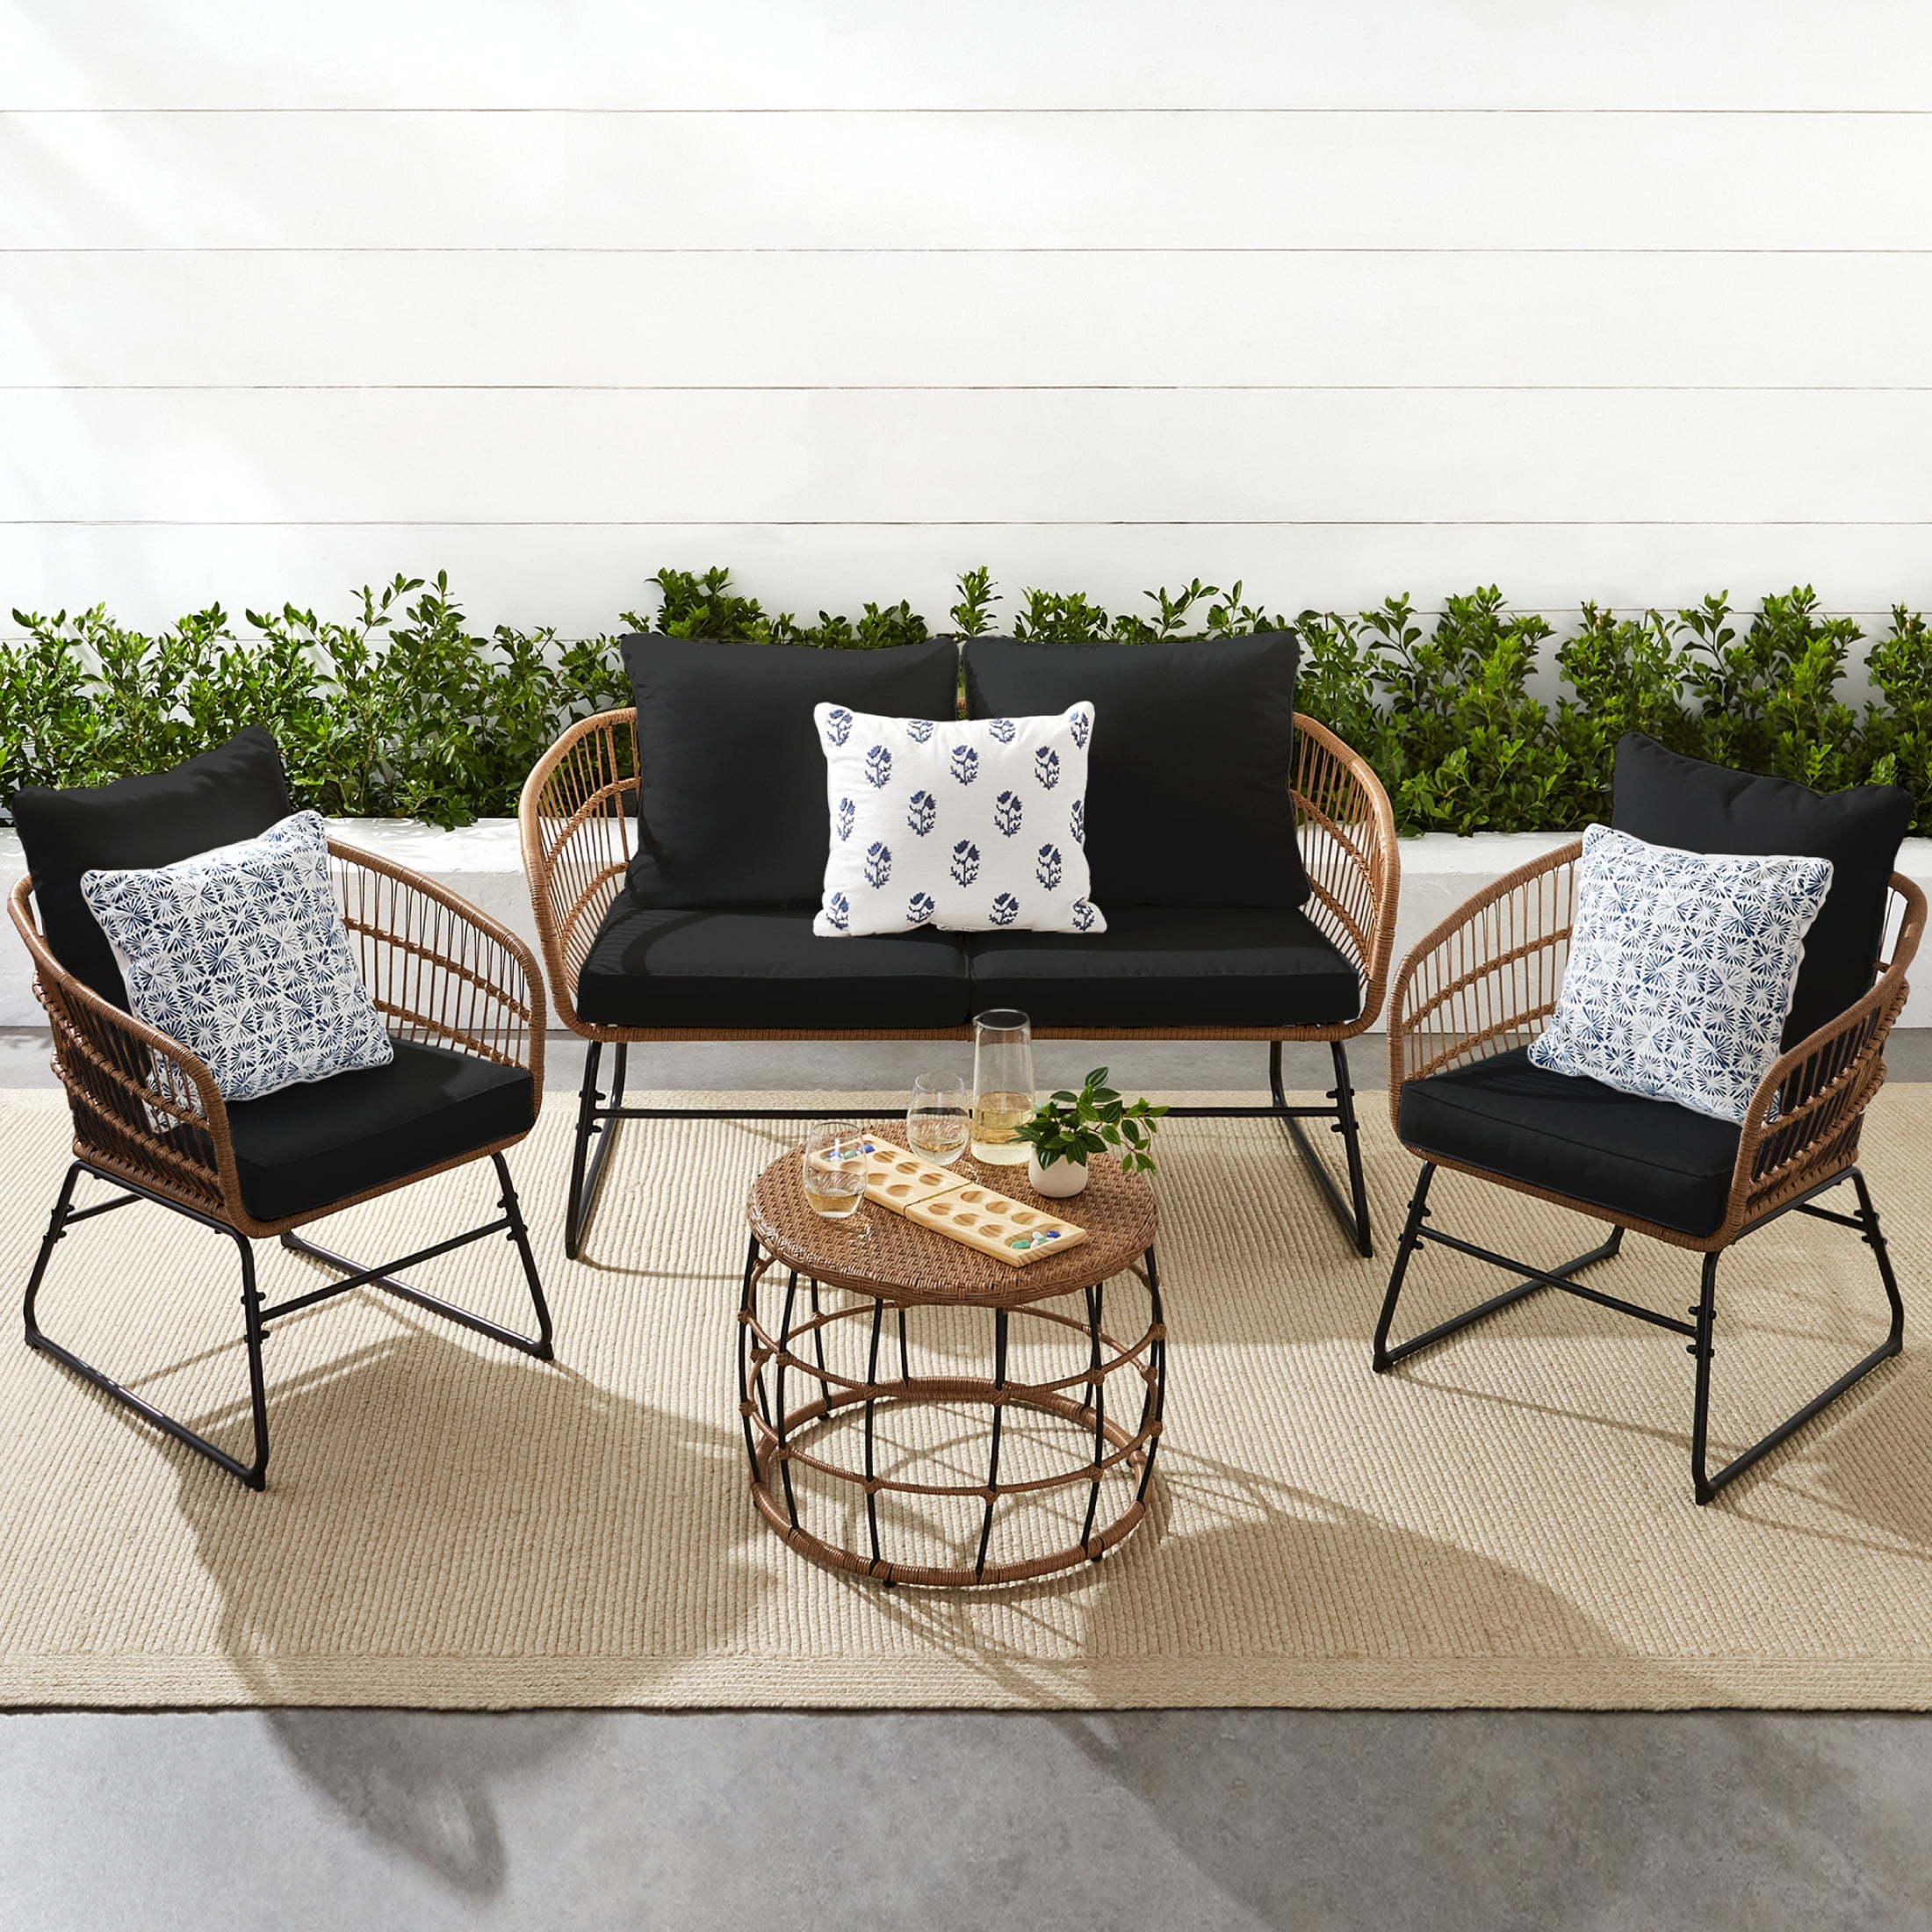 Best Choice Products 4-Piece Outdoor Rope Wicker Patio Conversation Set Modern Contemporary Furniture for Backyard Balcony Porch w/Loveseat Plush